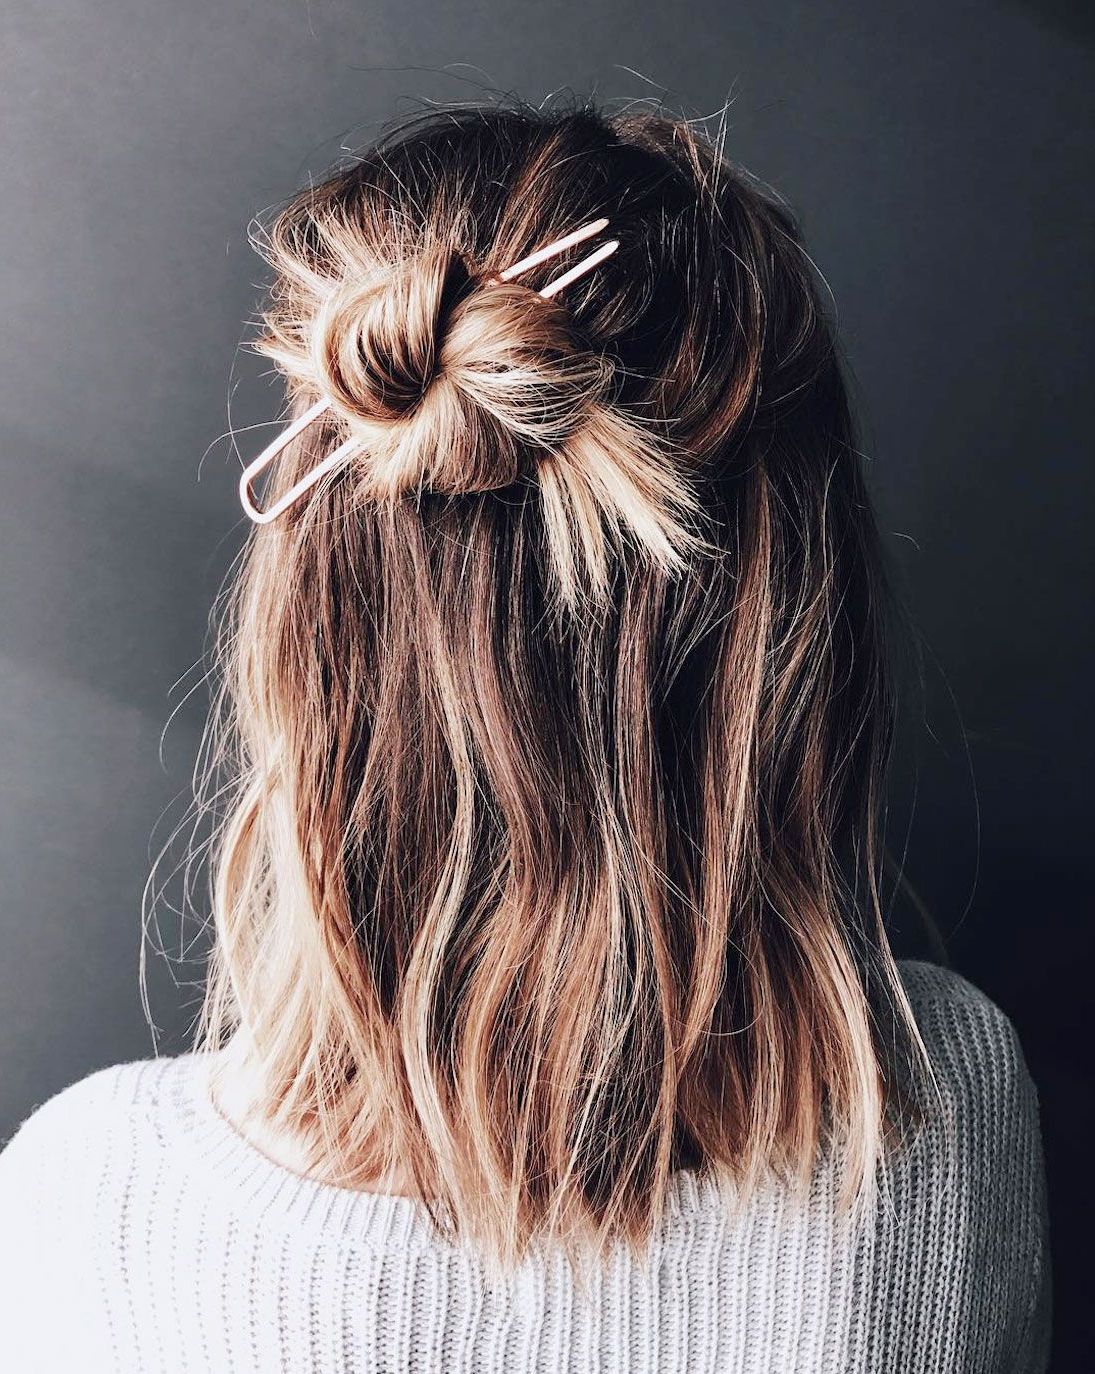 16 Half Bun Hairstyles For 2022 – How To Do A Half Bun Tutorial Intended For Most Recent Half Up Hairstyles With Top Knots (View 7 of 25)